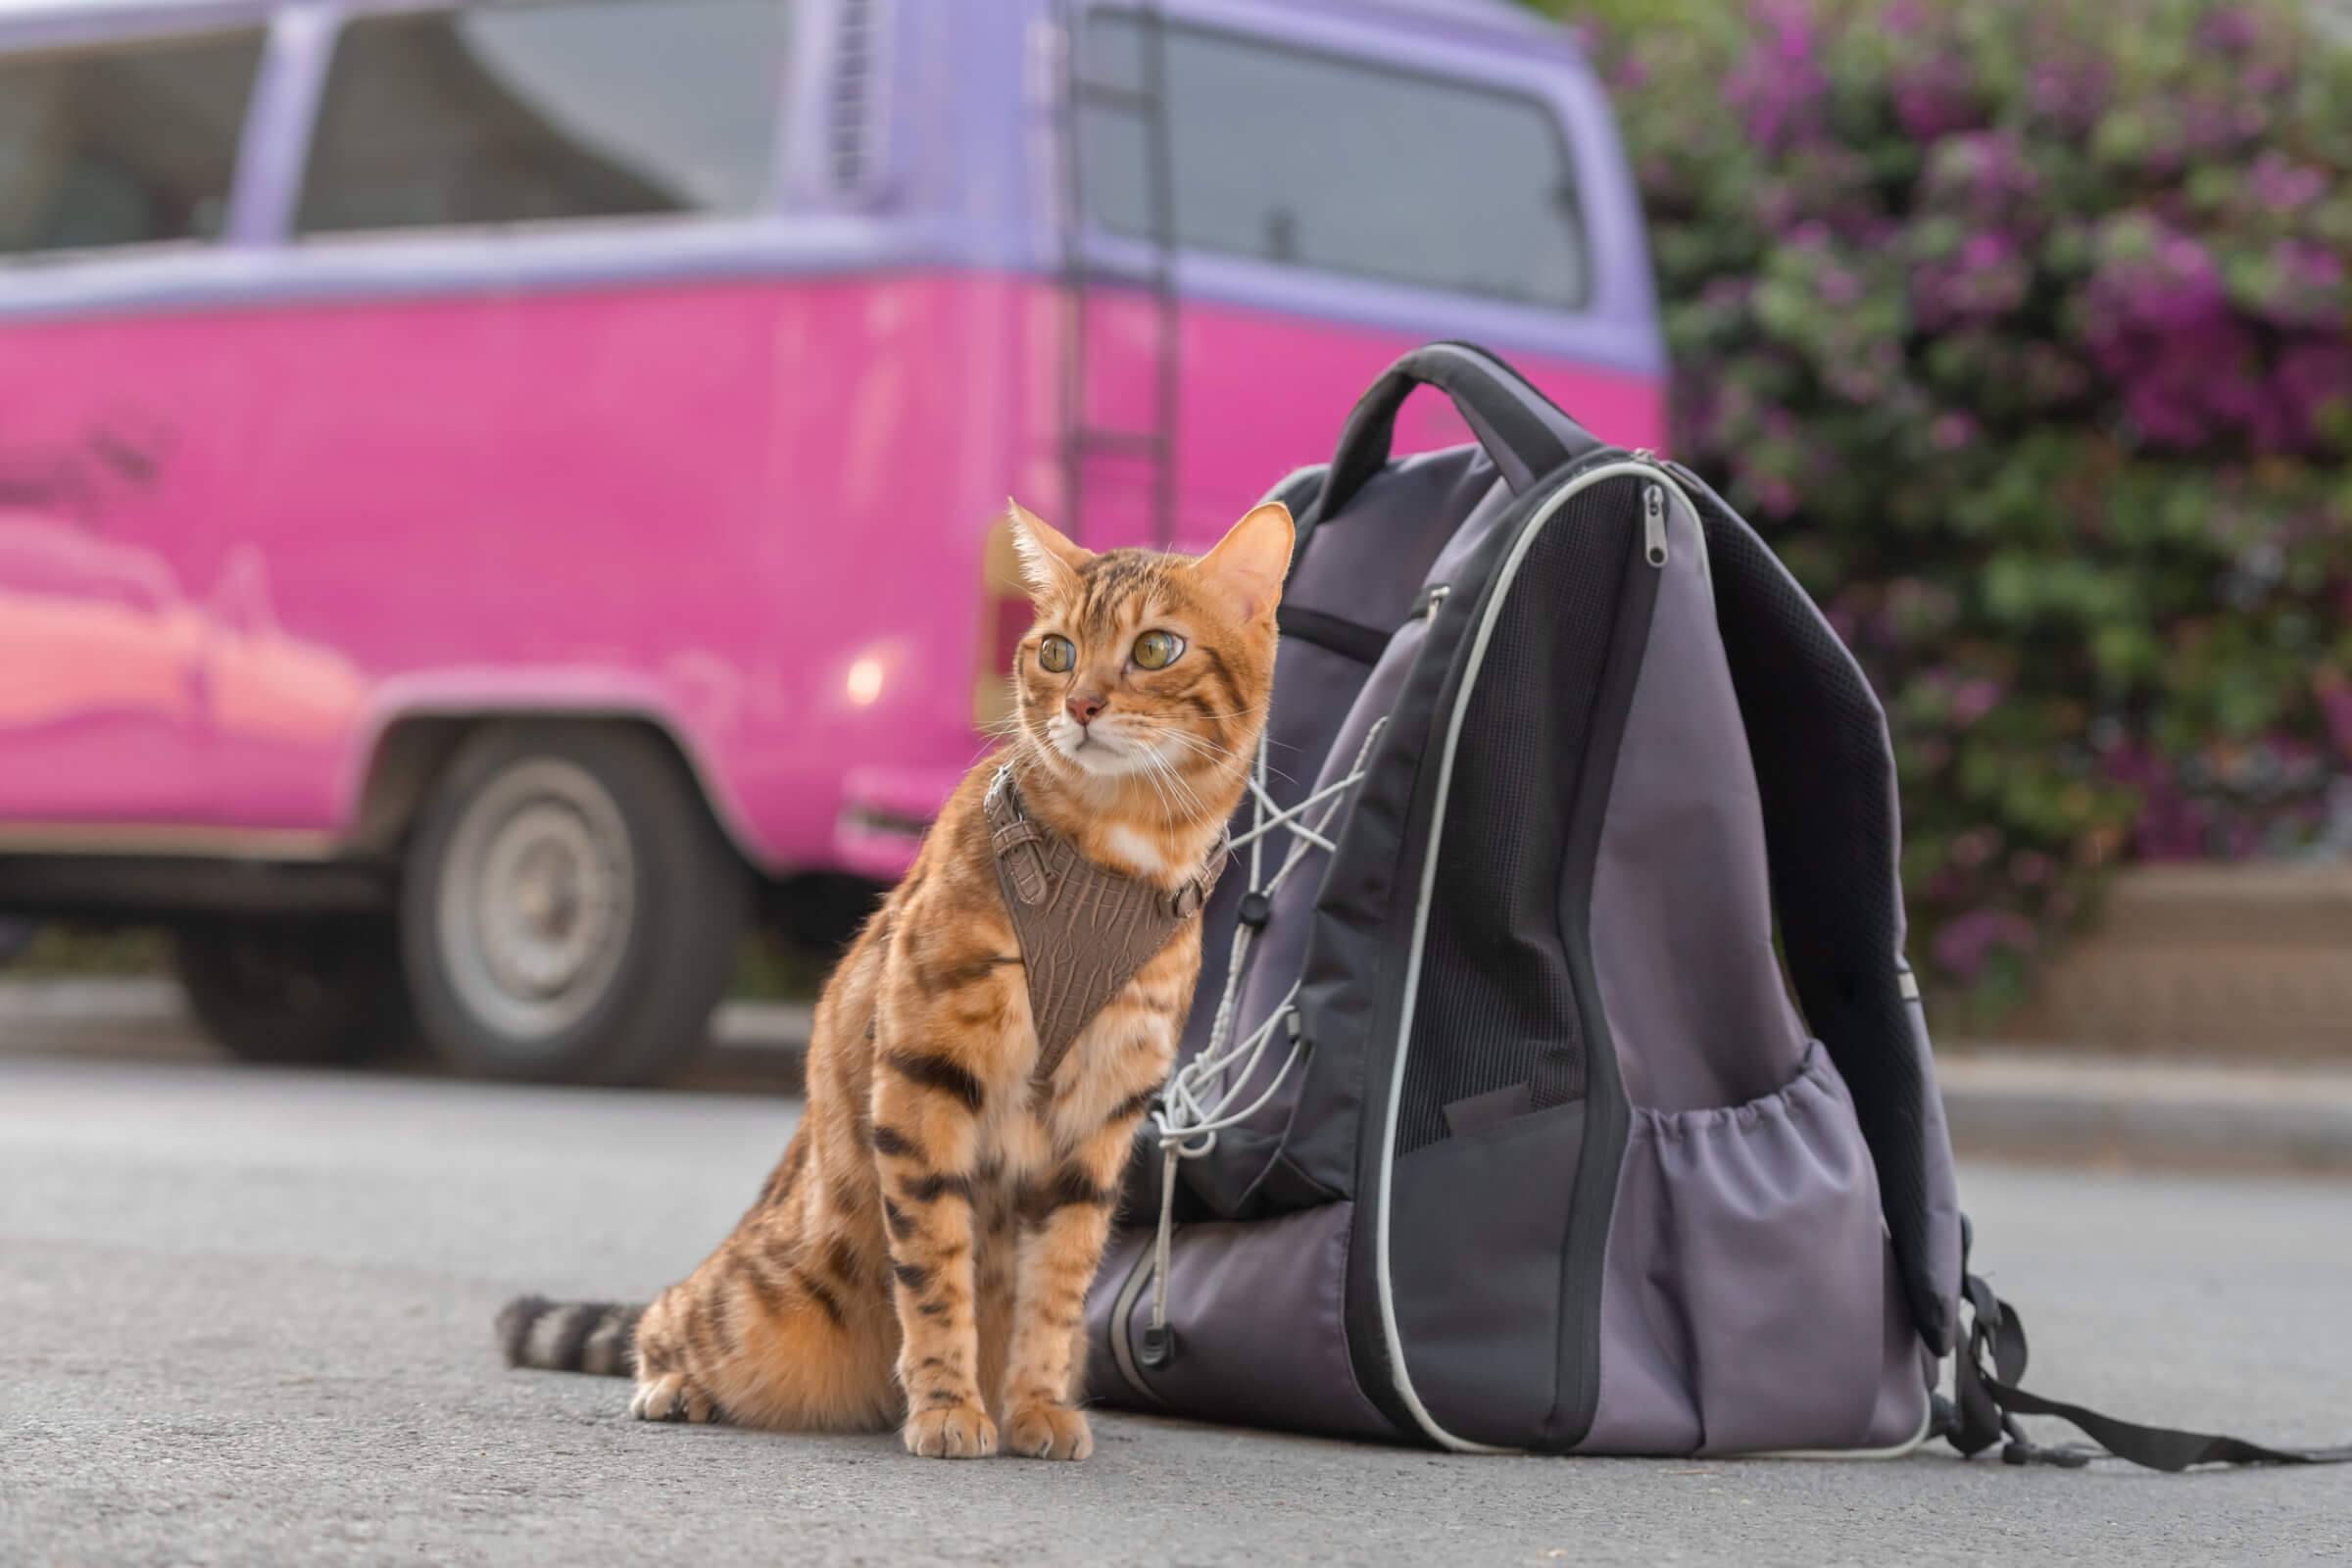 a cat and backpack sitting on the ground in front of a pink van